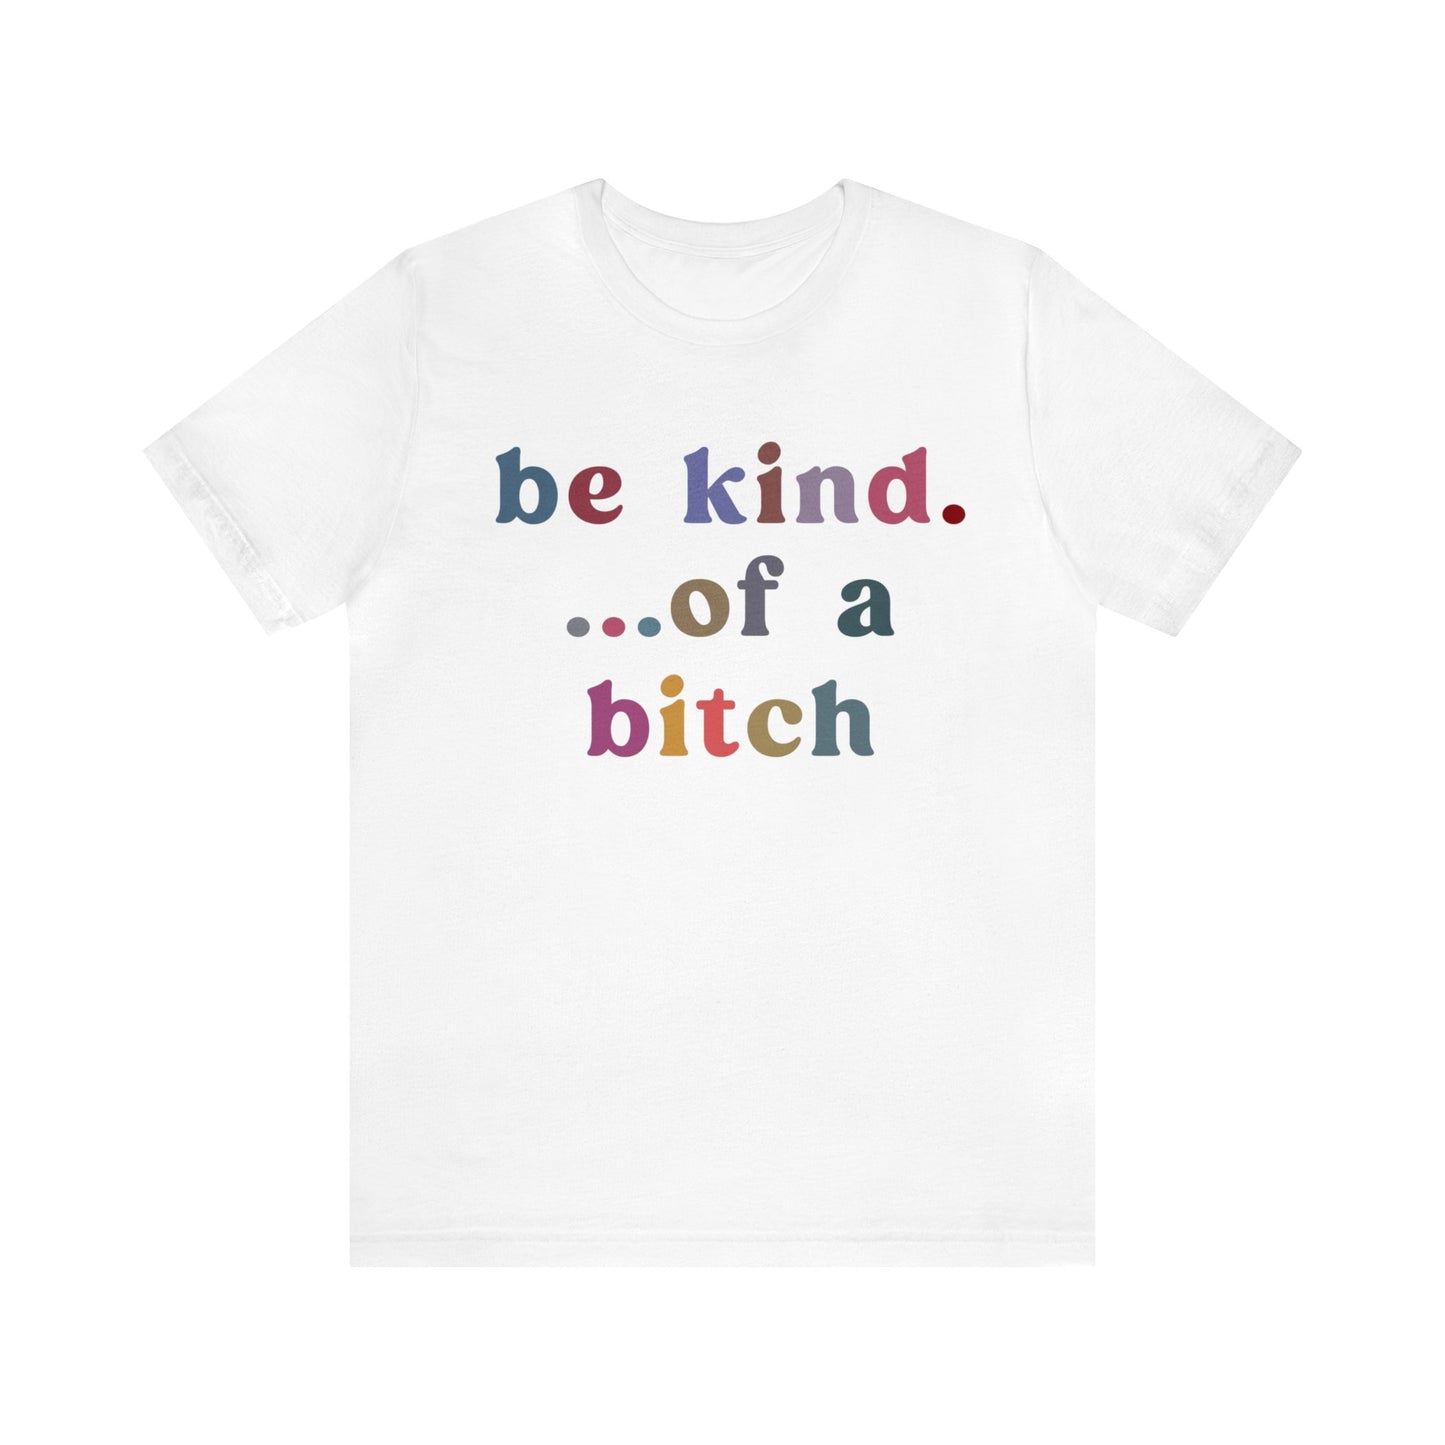 Be Kind Of A Bitch Shirt, Funny Girls Shirt, Funny Sassy Shirt, Sarcasm Shirt for Women, Funny Gift for Friends, Gift For Girls, T1199